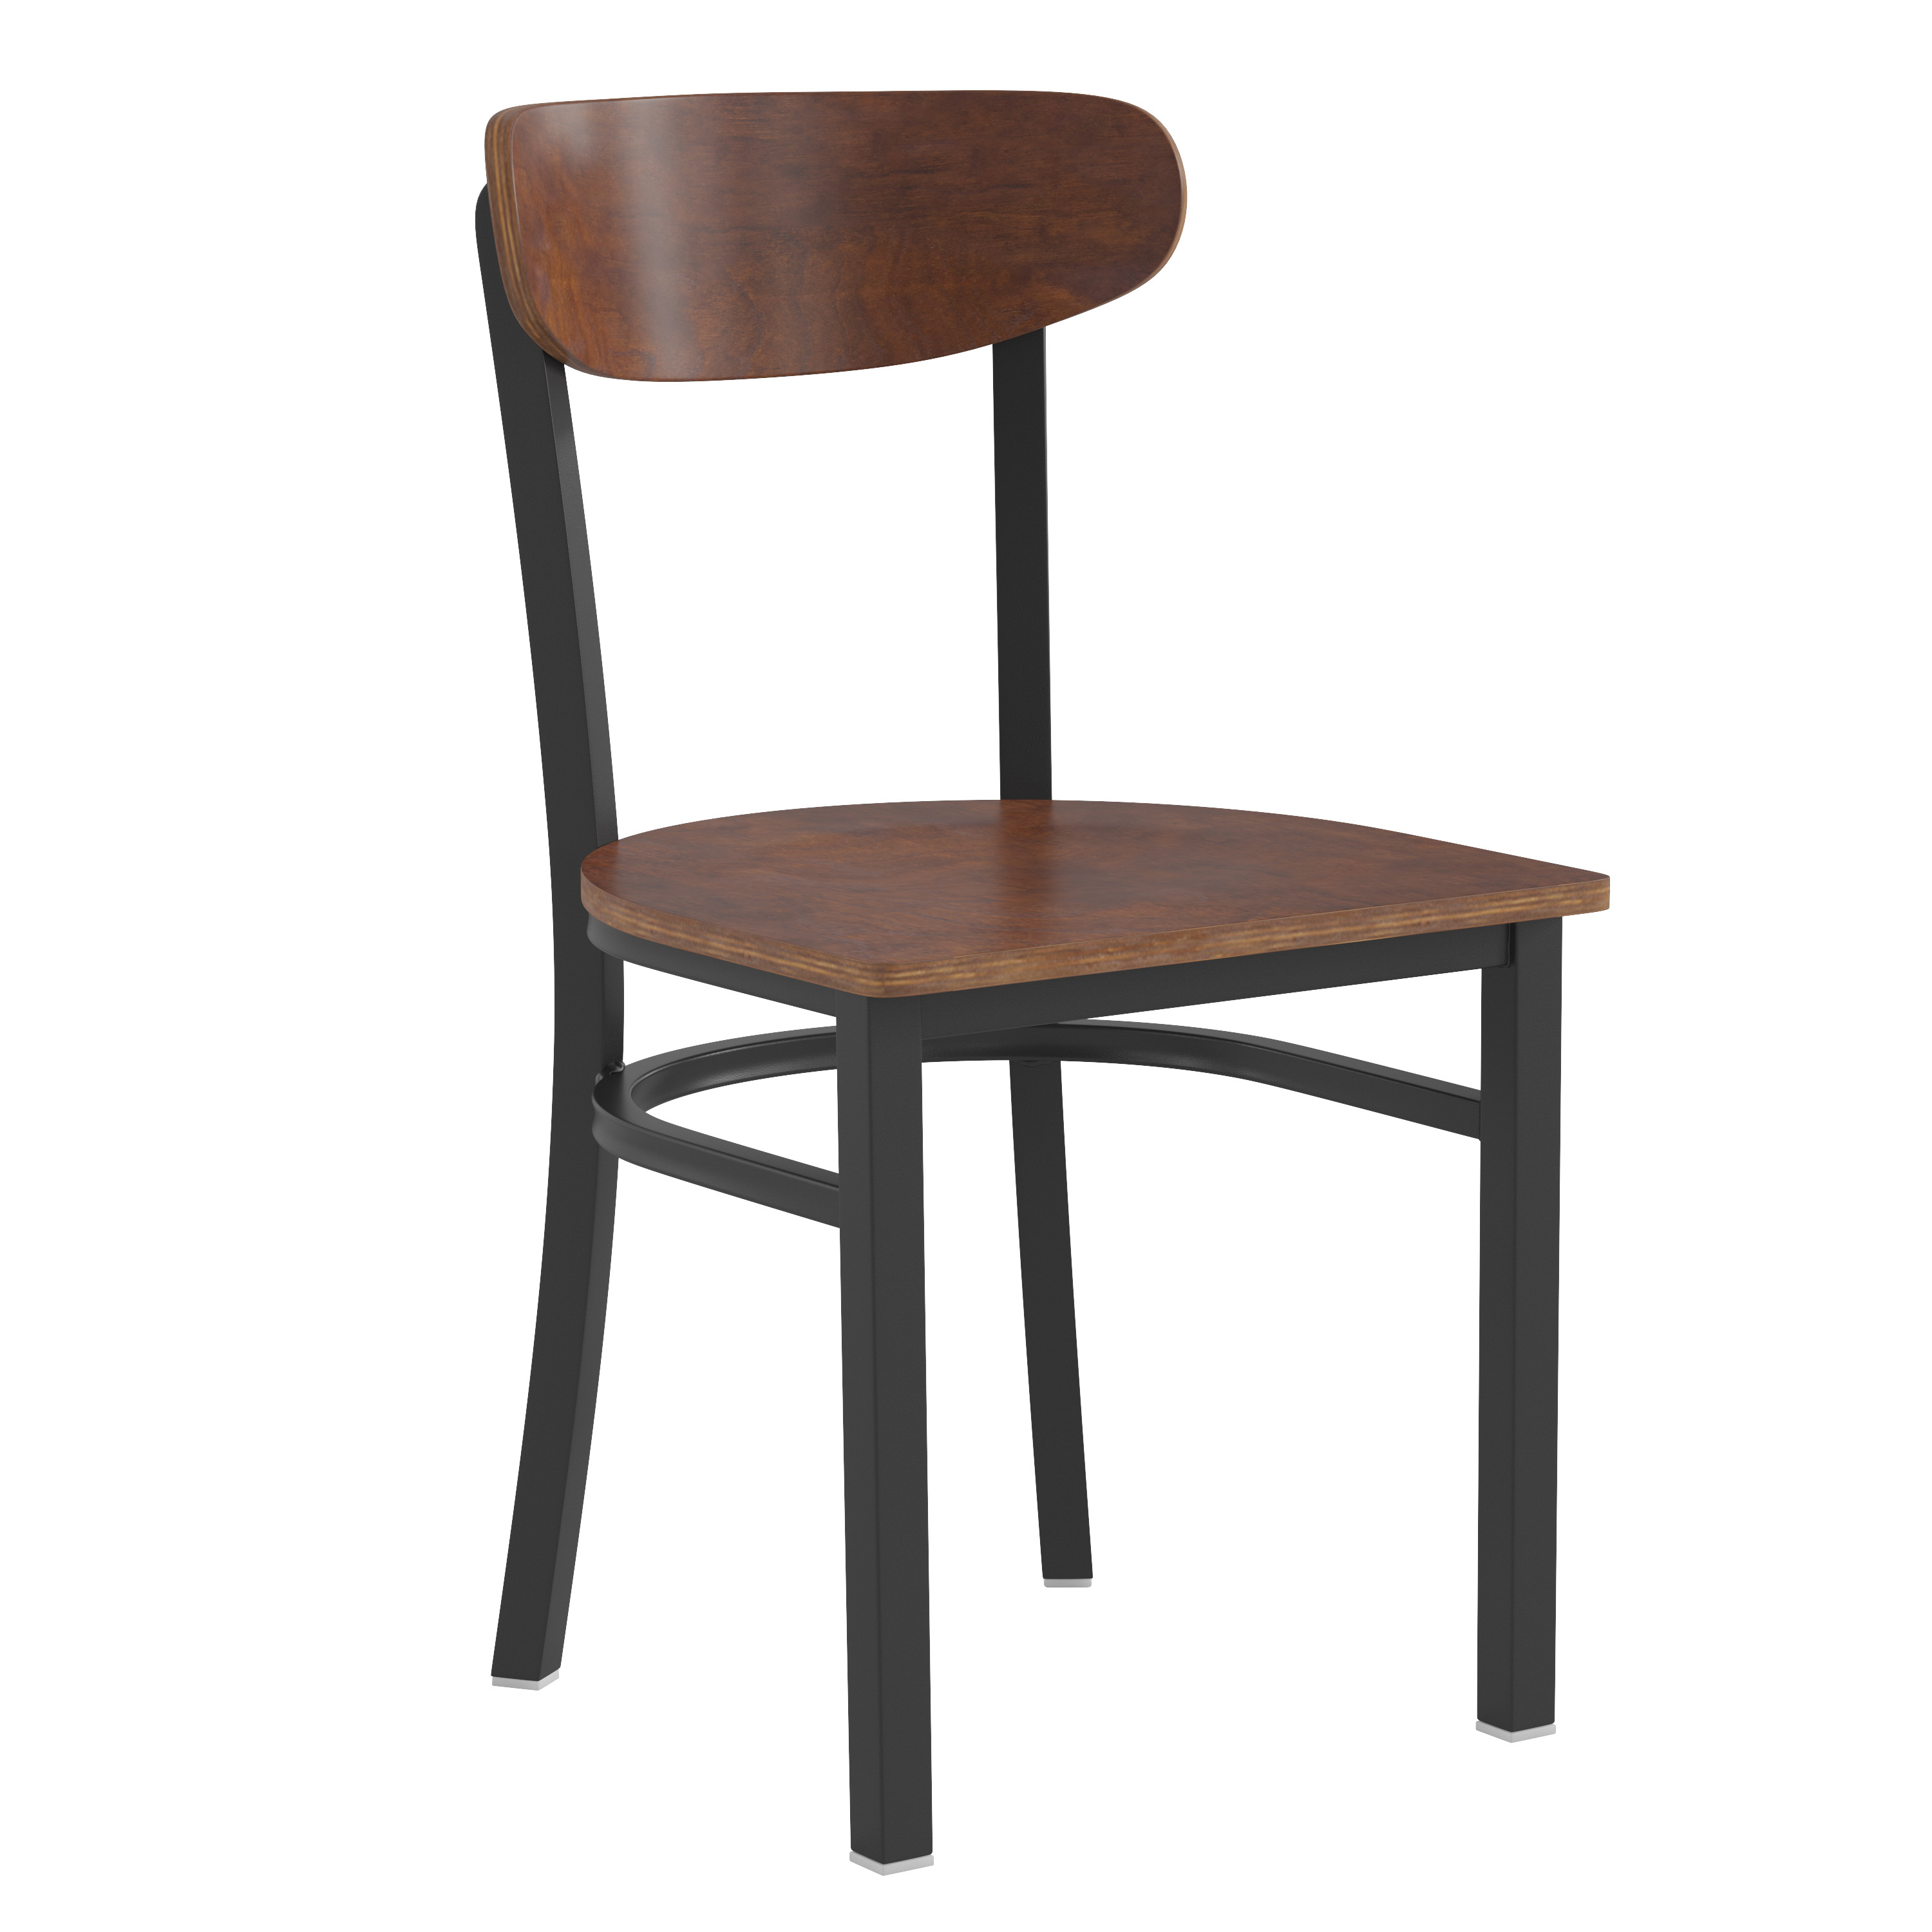 Flash Furniture XU-DG6V5B-WAL-GG Commercial Dining Chair with Walnut Wood Boomerang Back, Wood Seat, Black Steel Frame